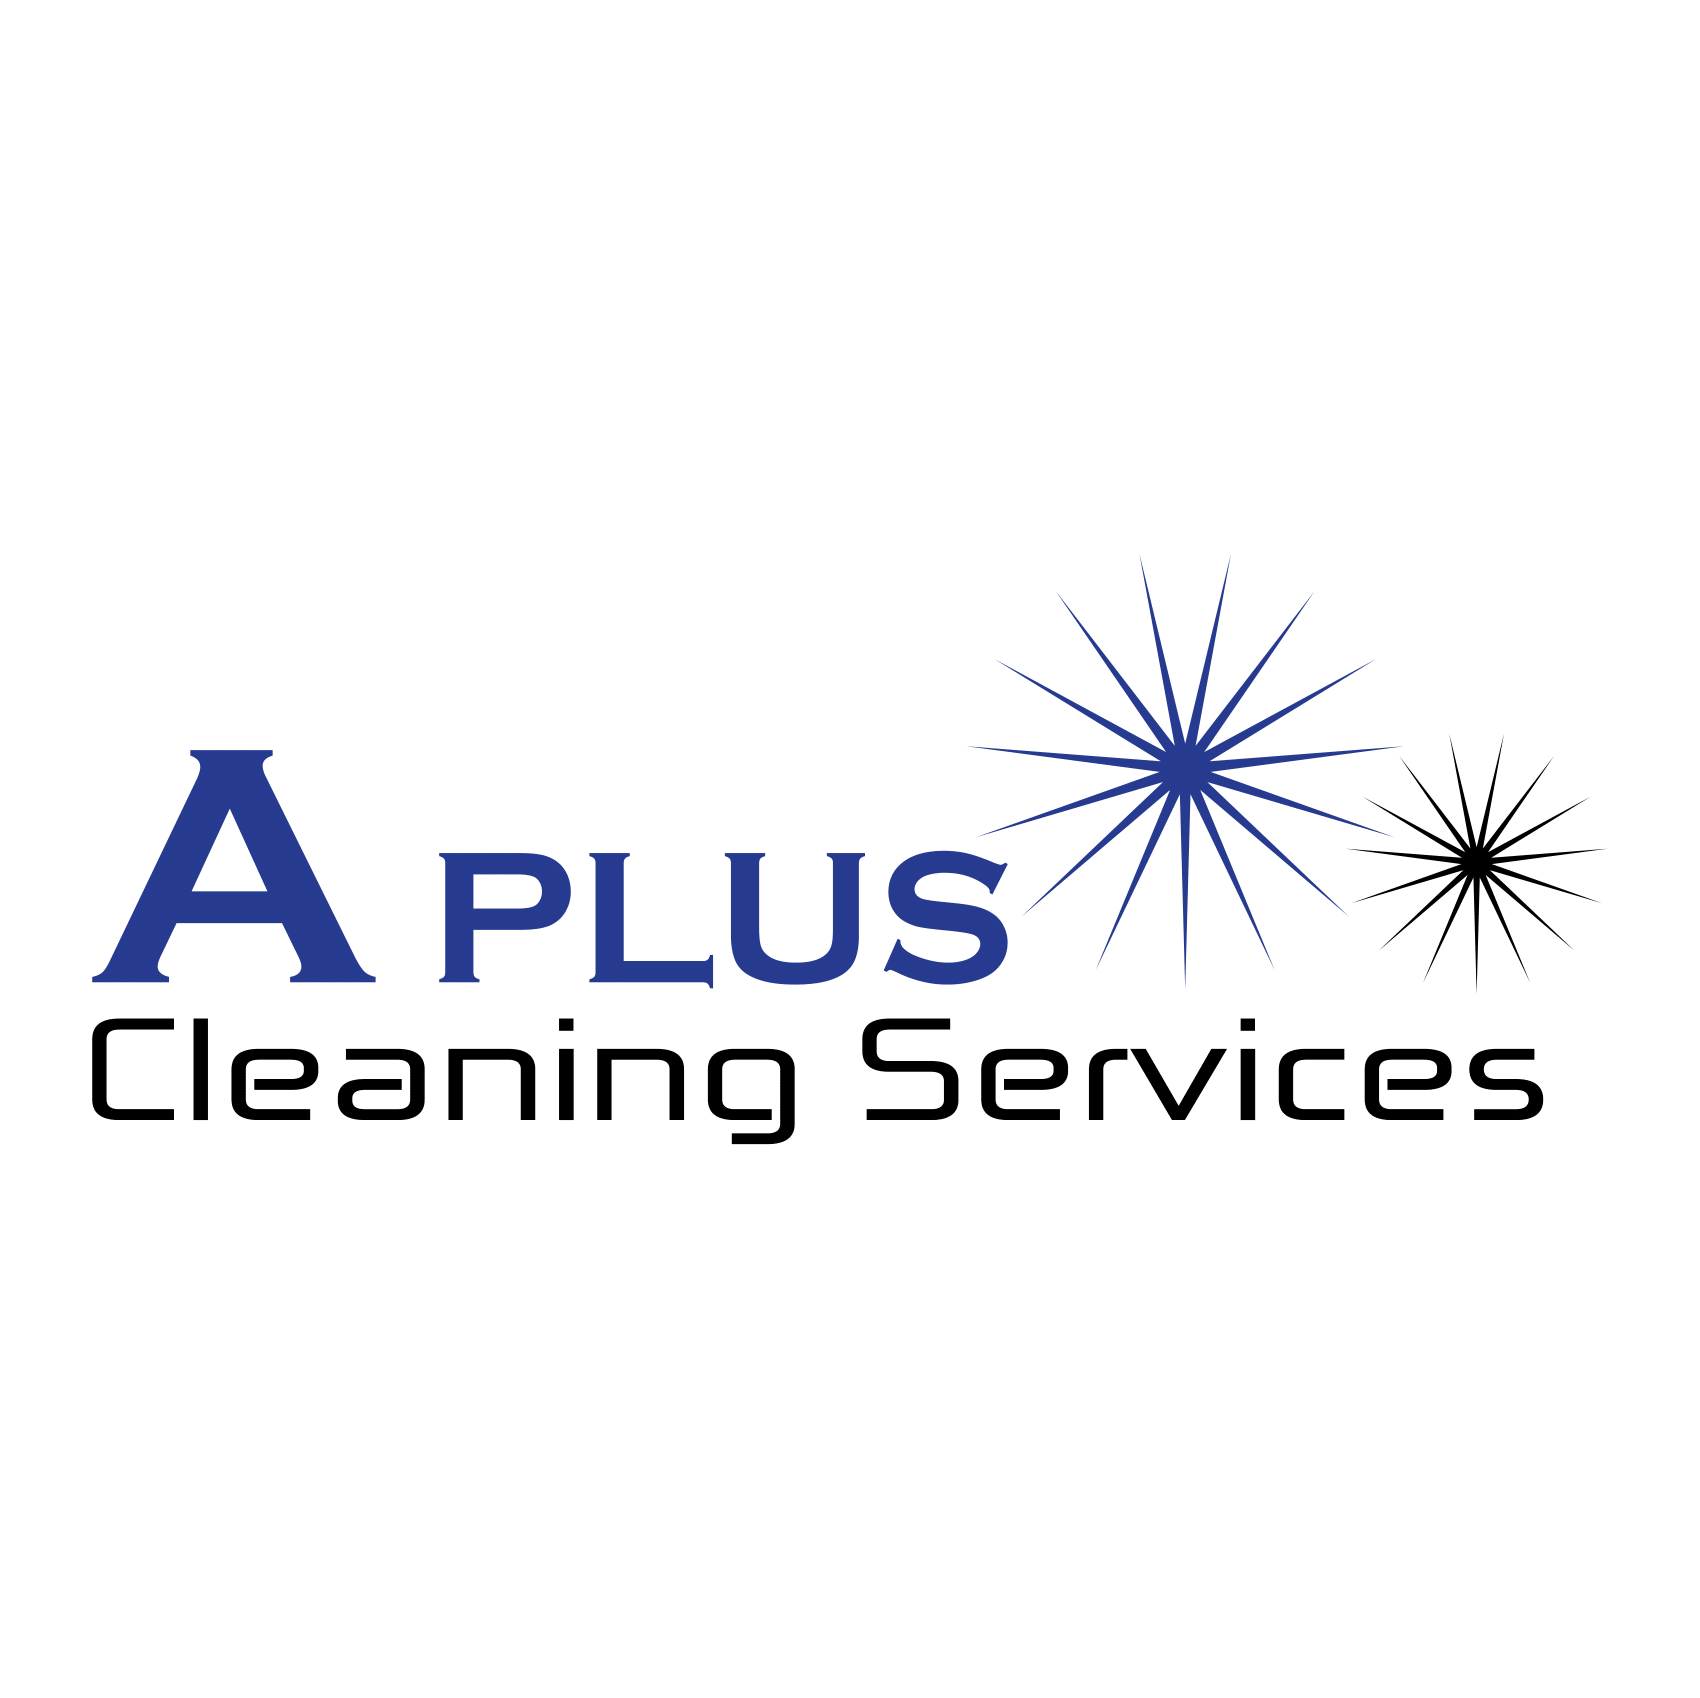 A Plus Cleaning Services, LLC